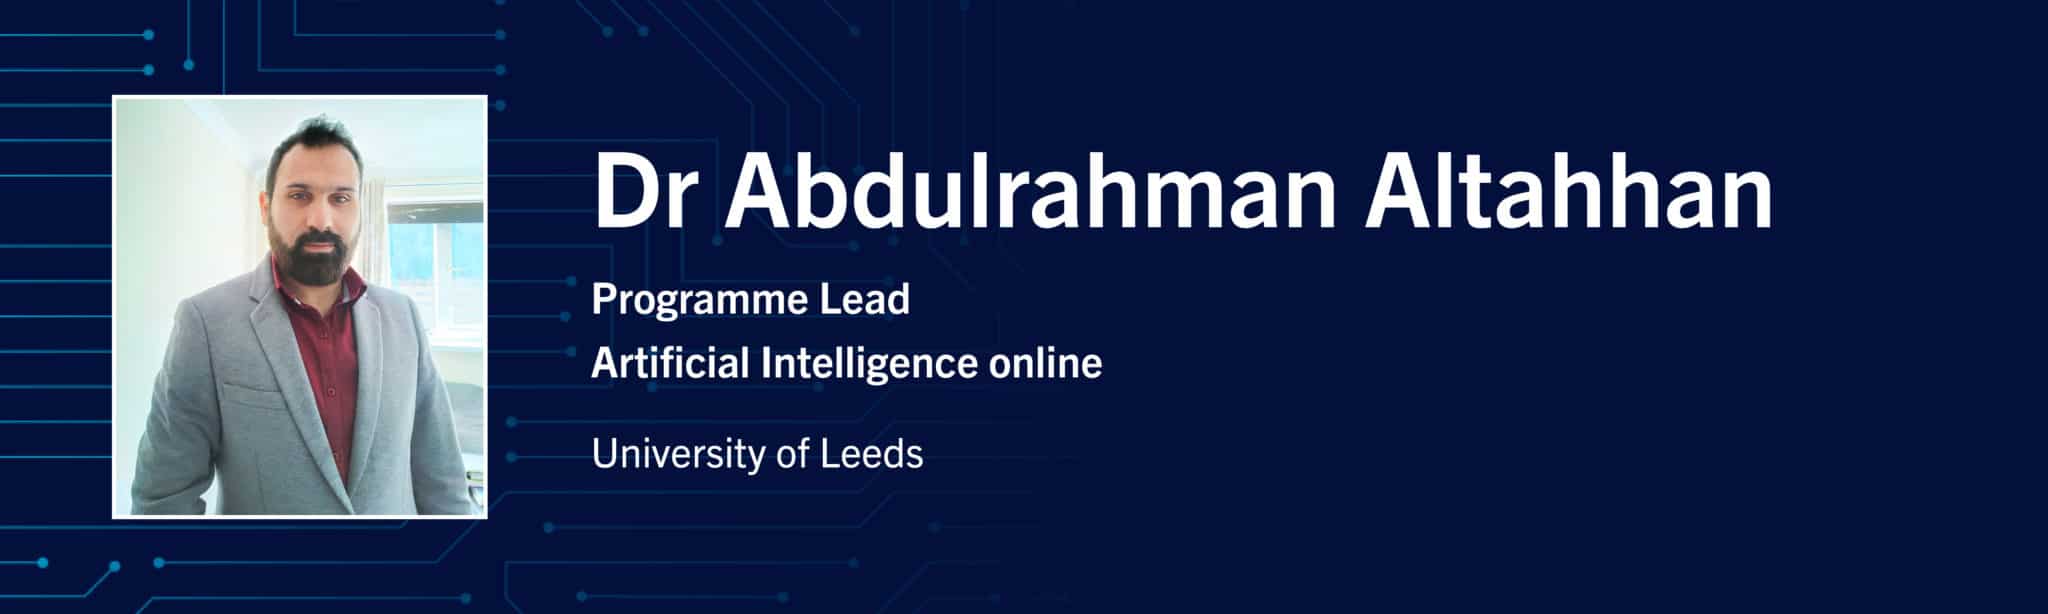 Meet the Programme Lead for Artificial Intelligence